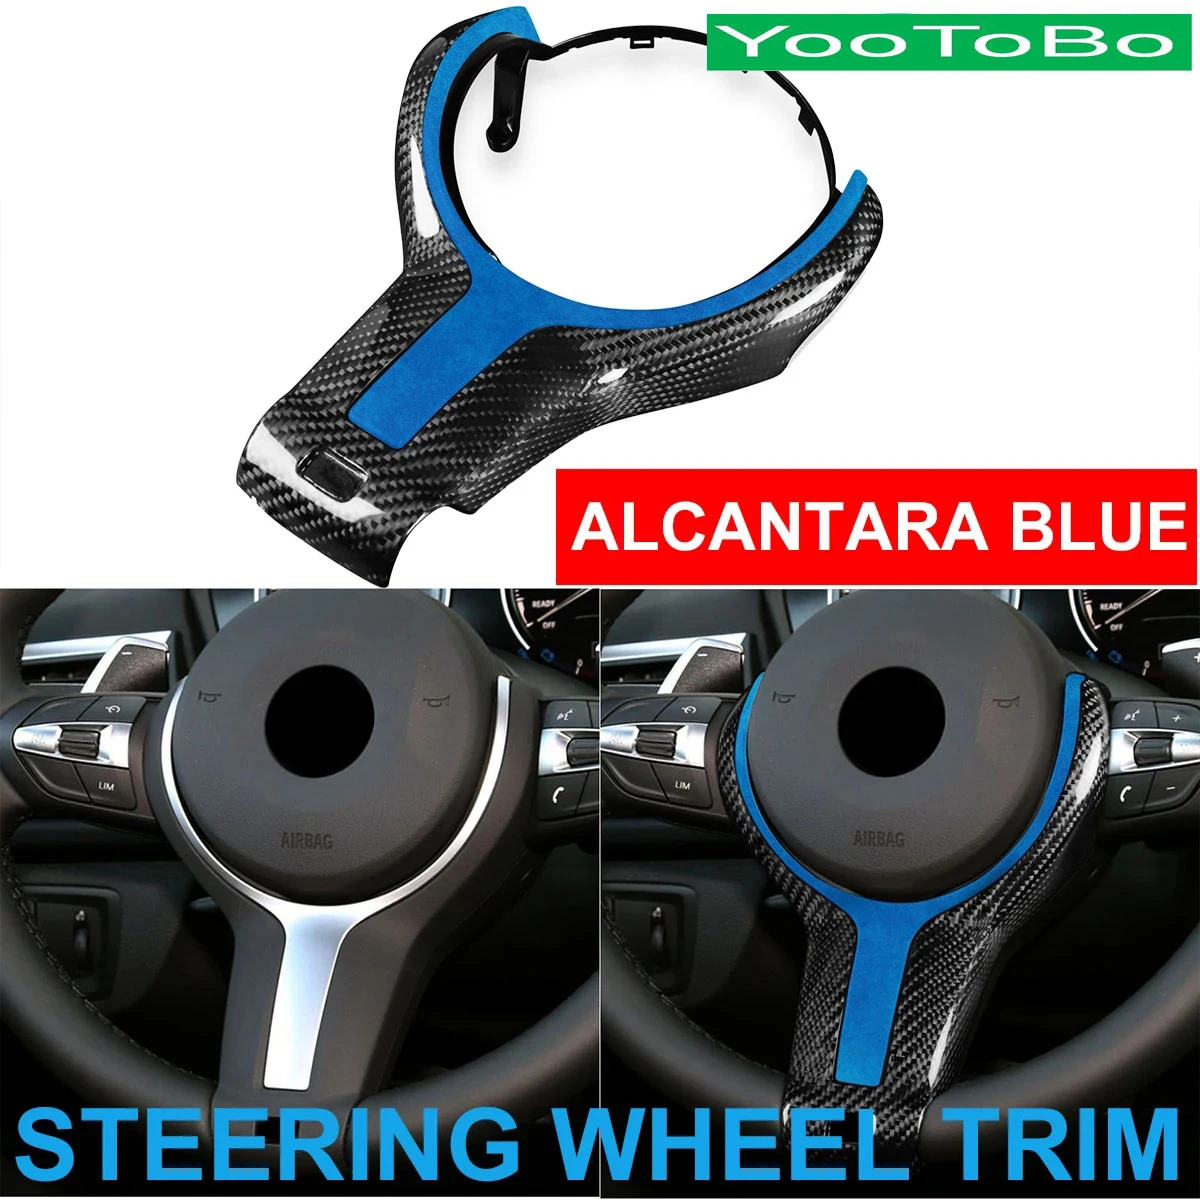 

Carbon Car Steering Wheel Trim Cover Replace Alcantara Blue For BMW M Sport F20 F22 F30 F31 F32 F36 F10M F06 F12 X5 F15 X6 F16